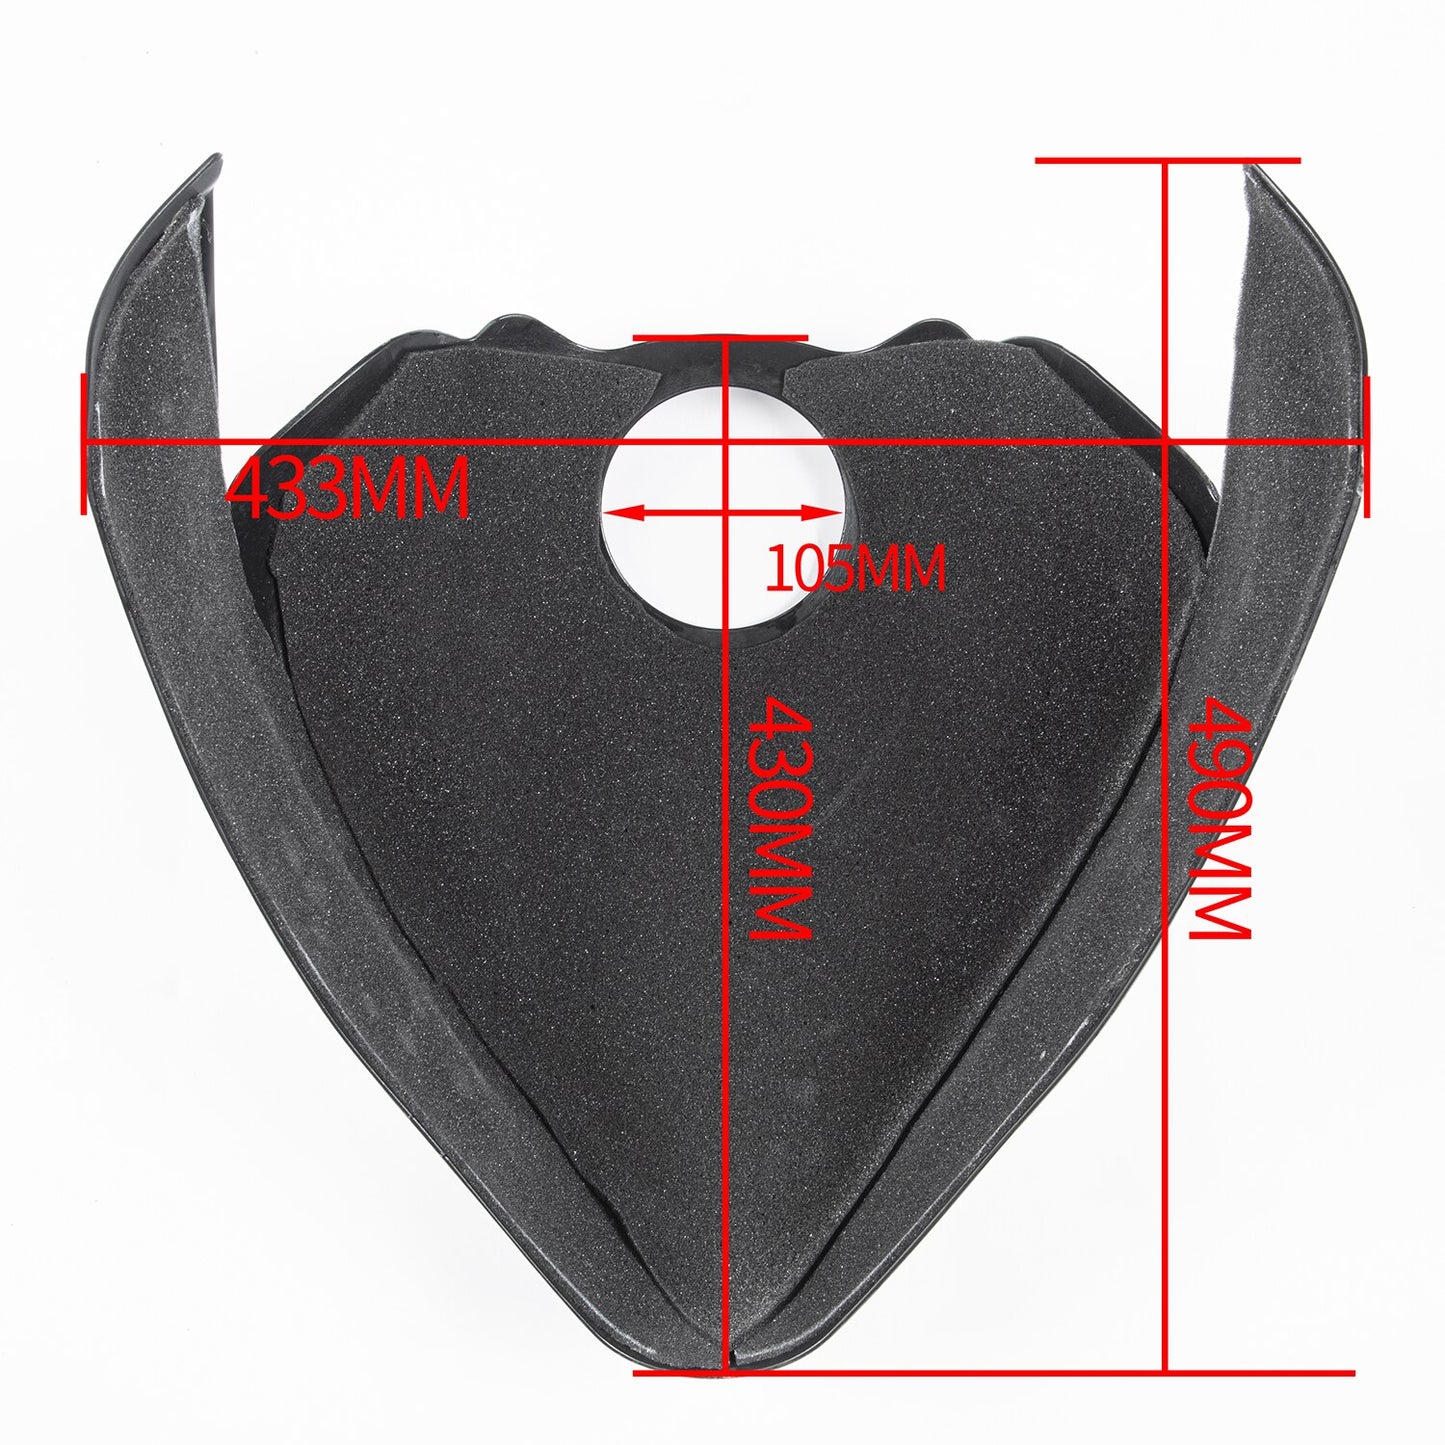 Wolfline Motorcycle Tank Protect Cover Oil Gas Guard For Suzuki GSX-S1000 2015-2020 2017 2018 2019 GSXS1000 GSXS GSX-S 1000 Accessories